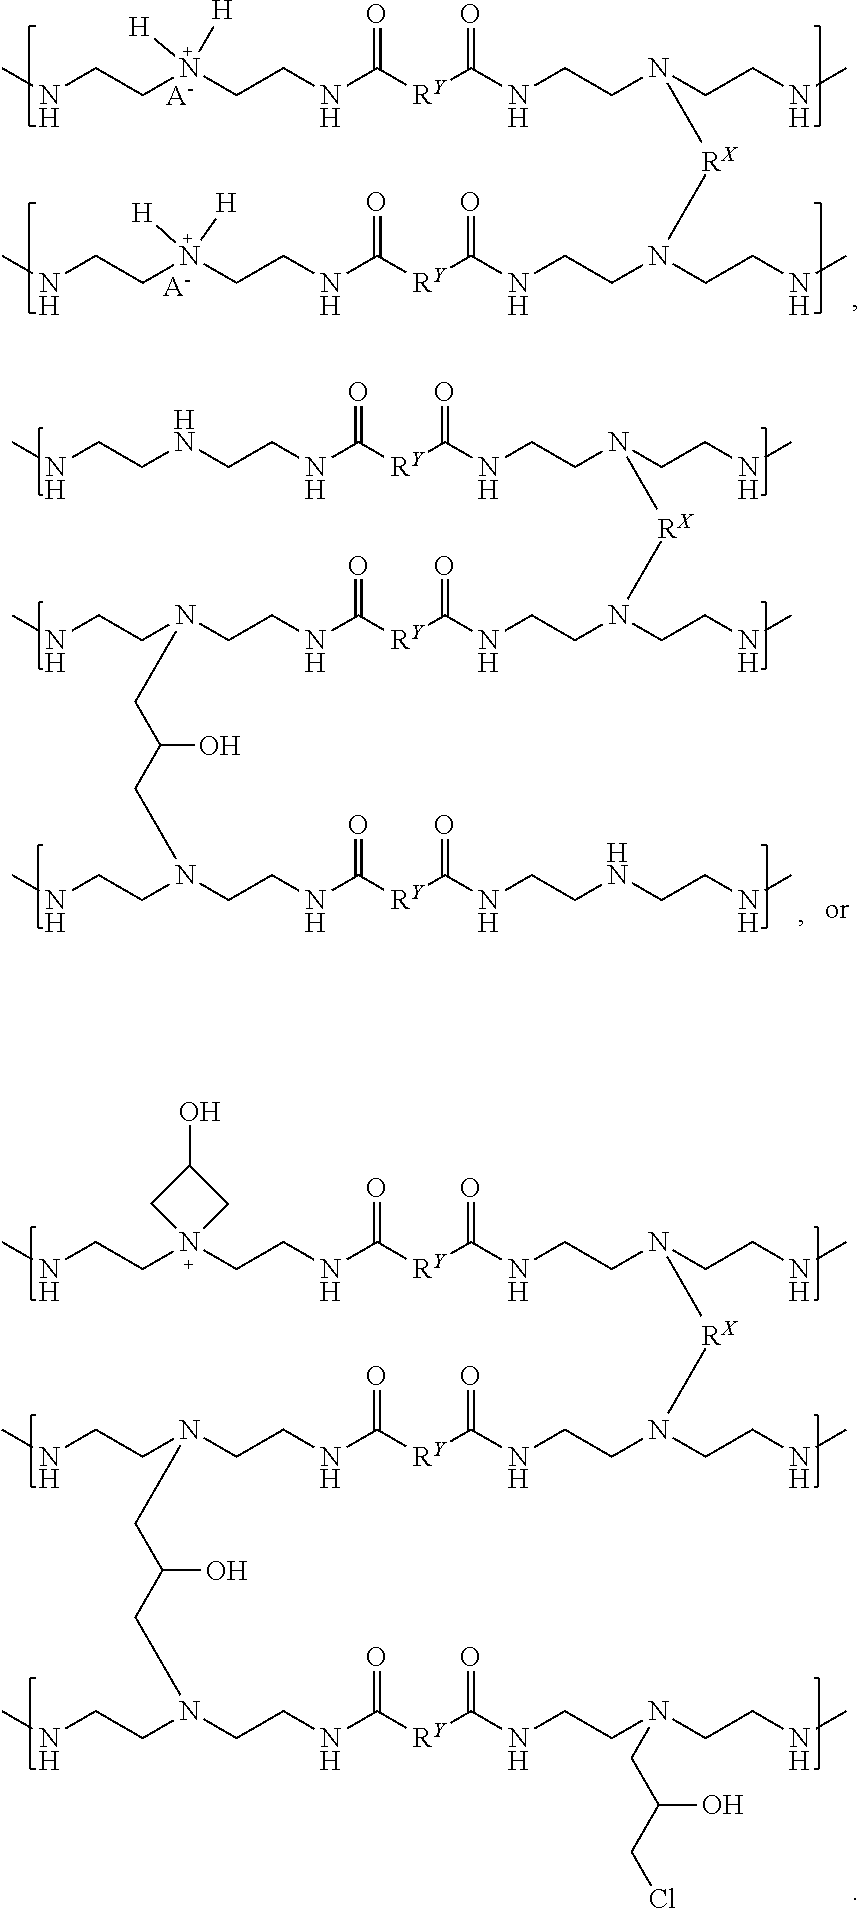 Creping adhesives containing functionalized crosslinked resins